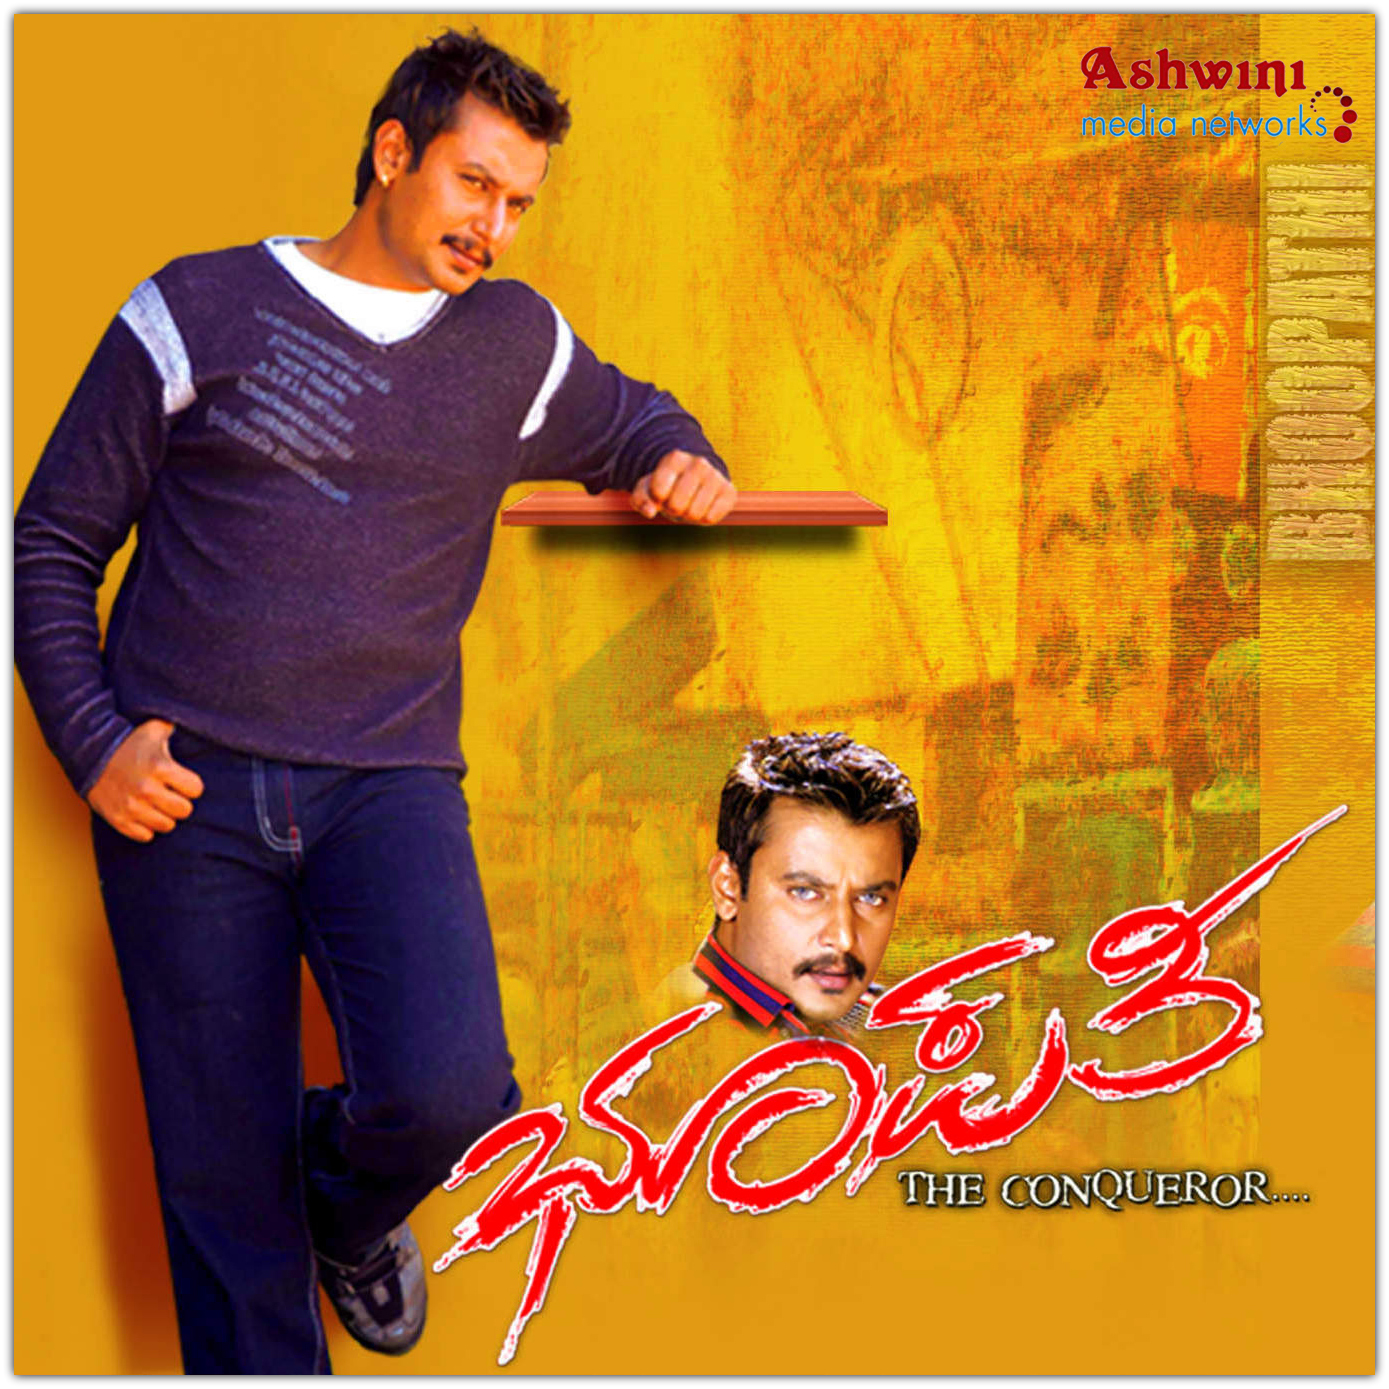 A to z mp3 songs free, download kannada version